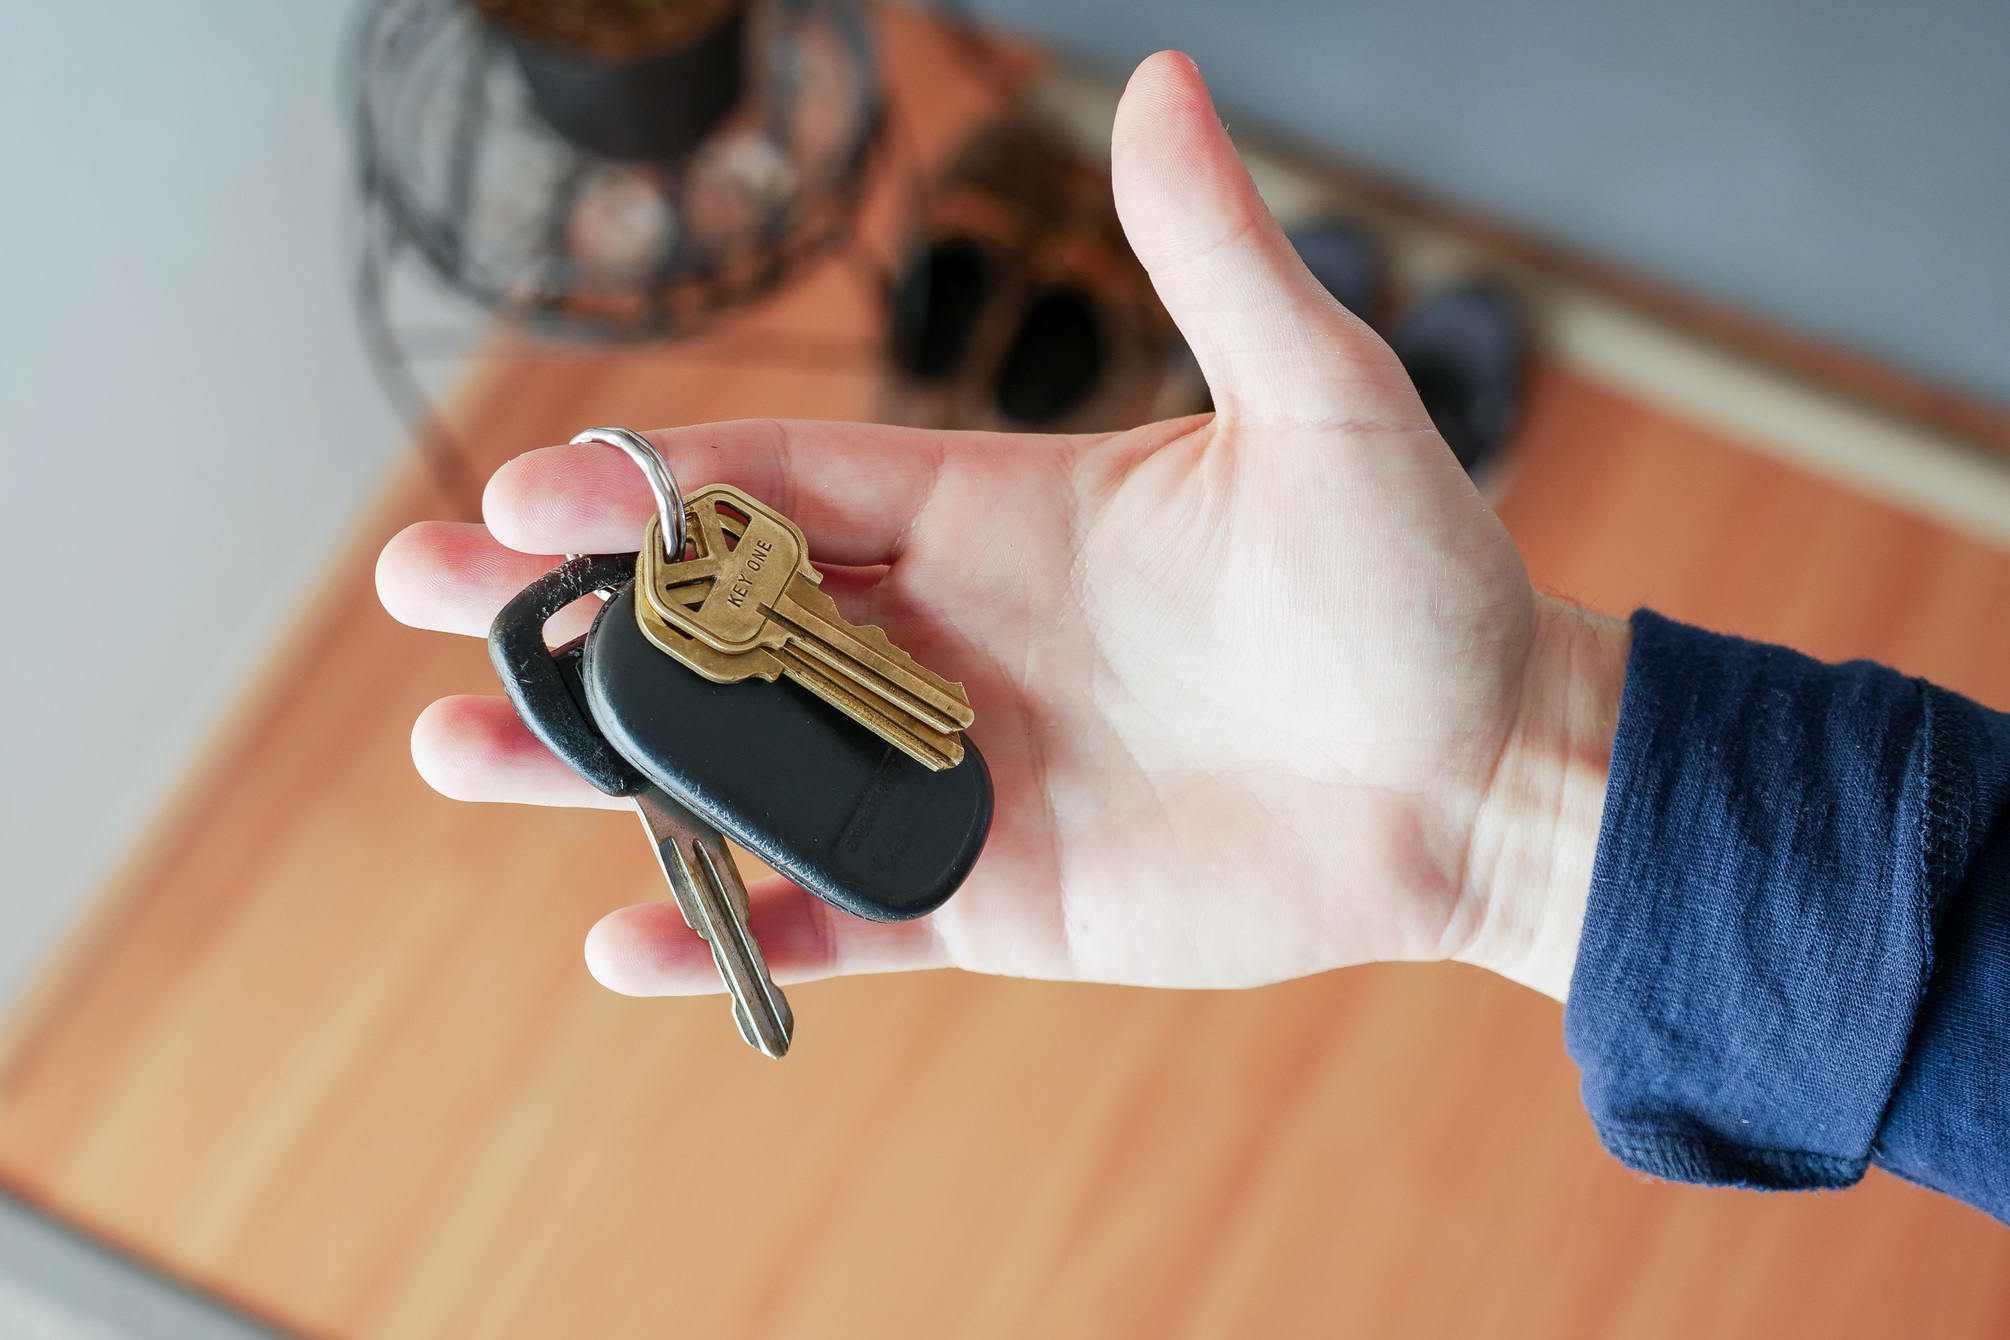 Attach car keys and fobs to the D-ring on your Key Organiser with a  standard key ring, or check out our *life-changing* Orbitkey Ring and…